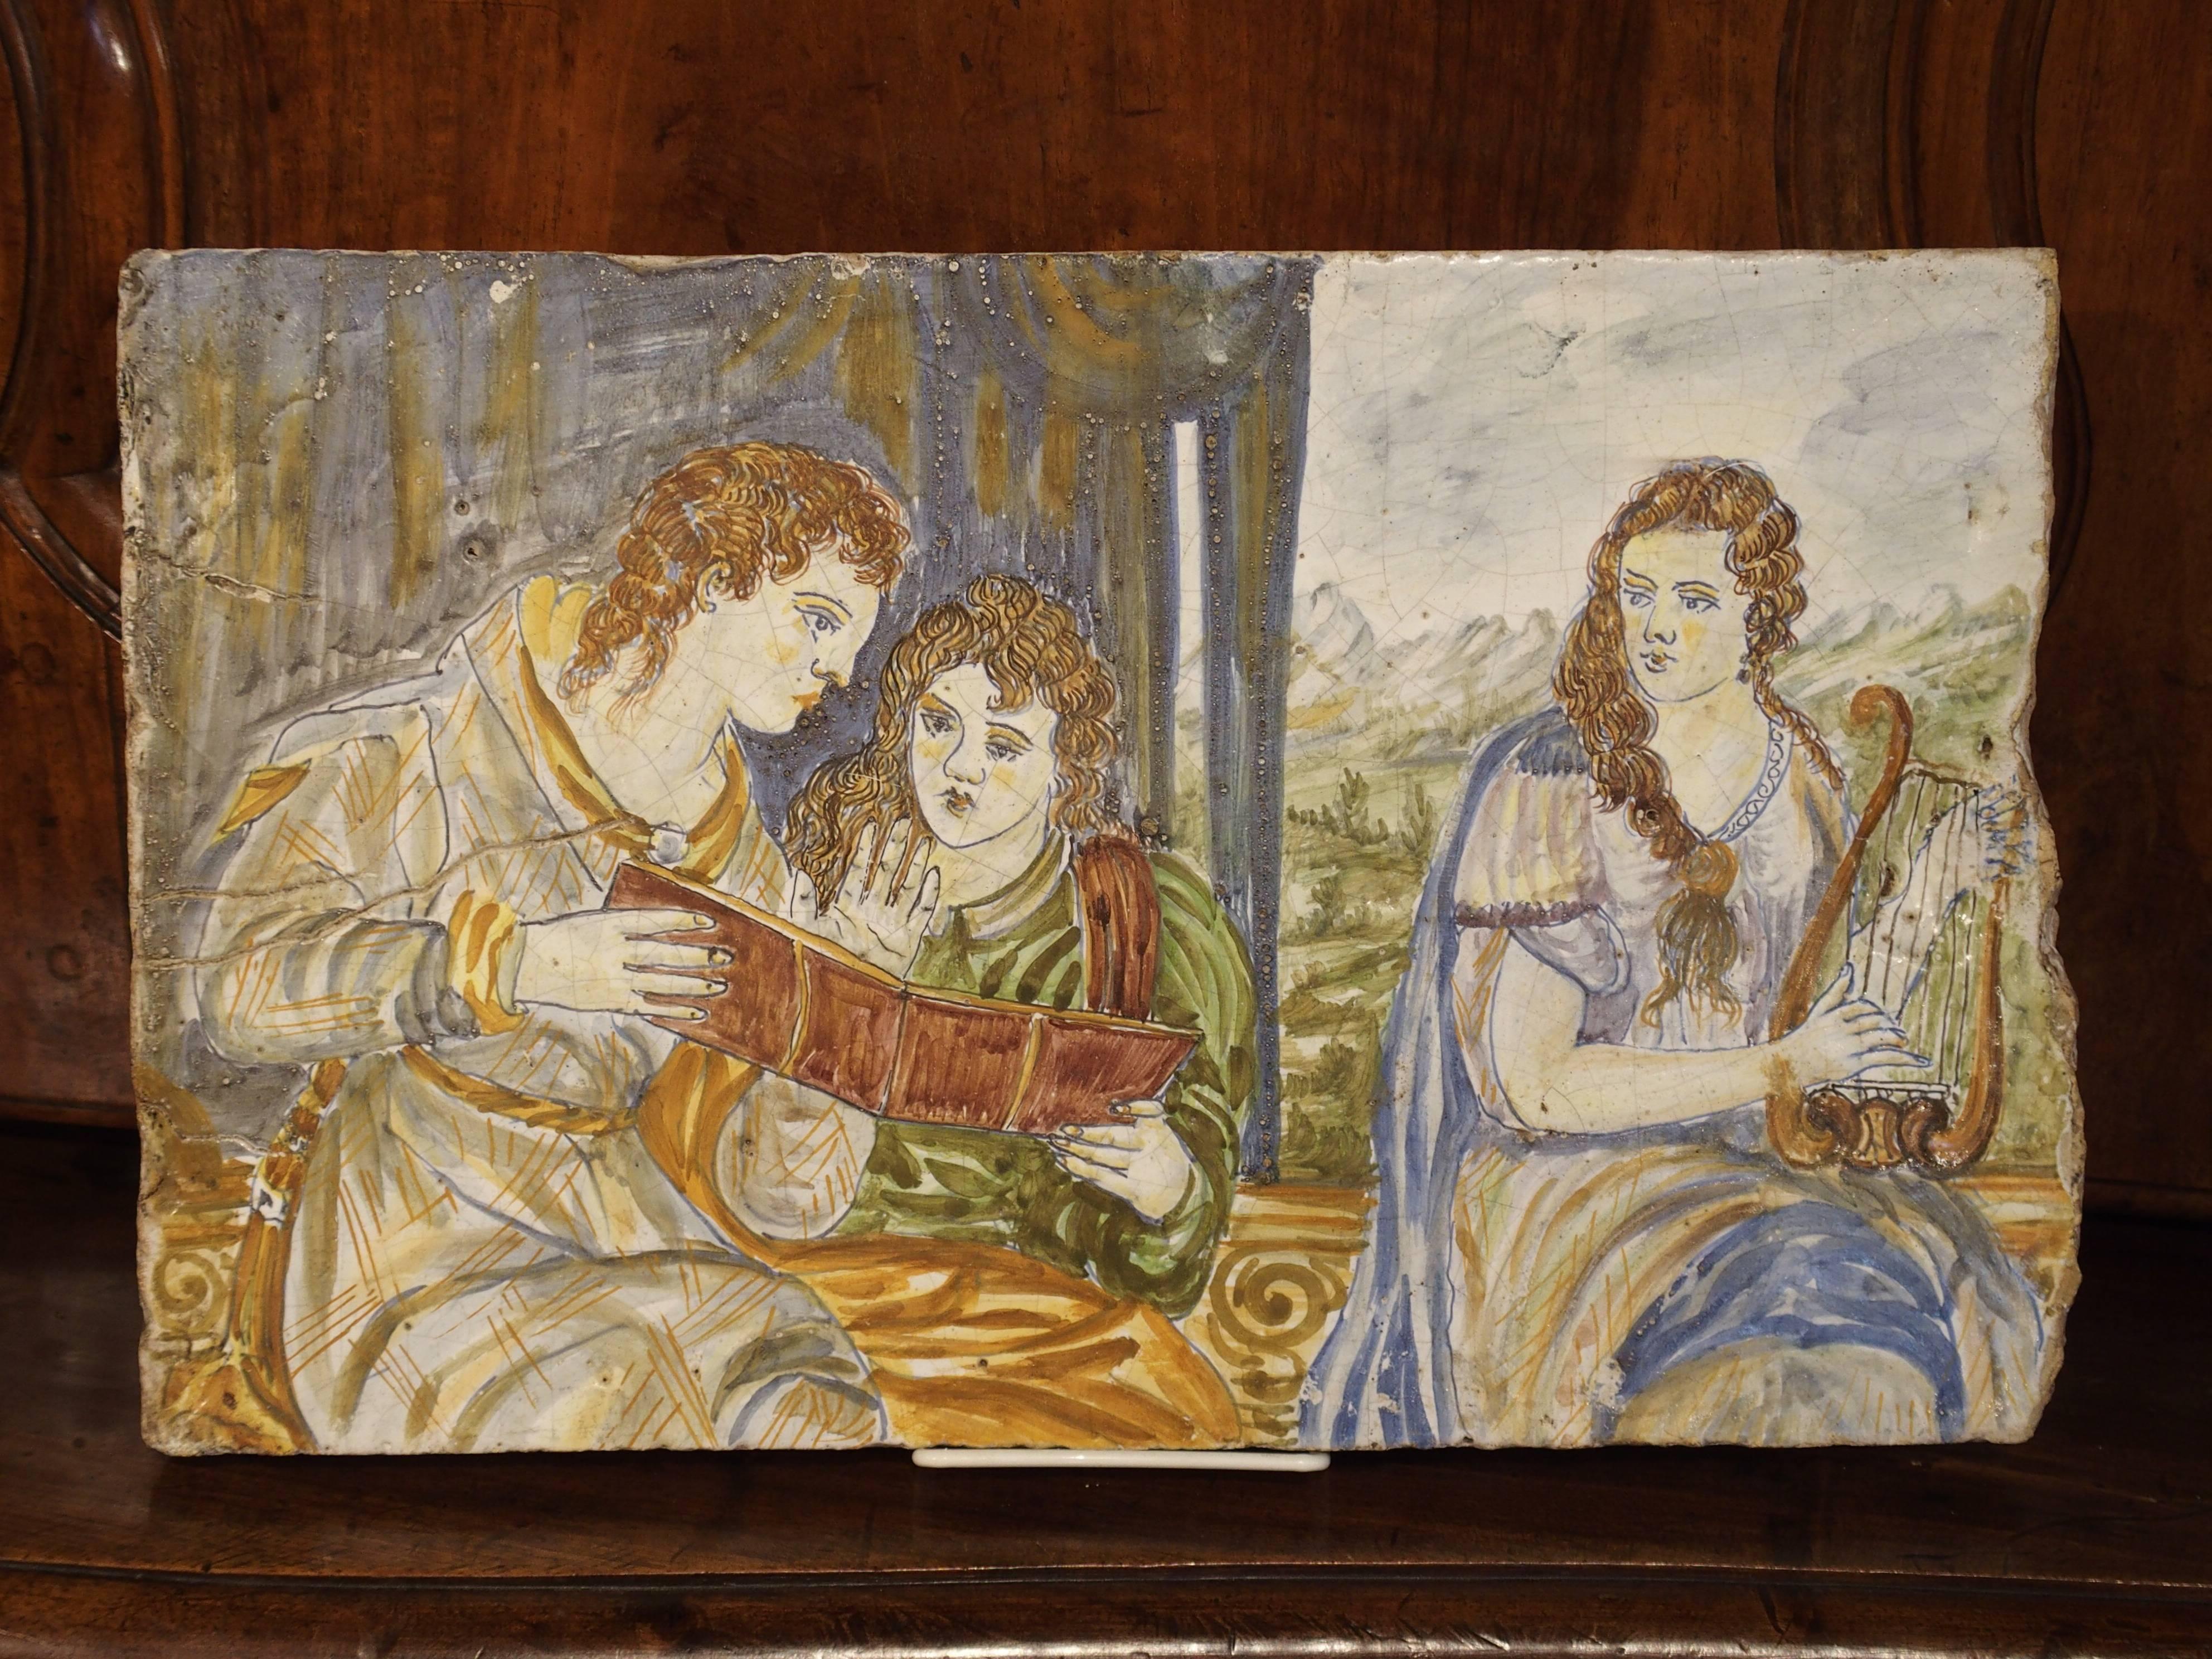 This impressive and very thick majolica or maiolica tile is from Italy and has hand-painted scenes known as istoriato wares (painted with stories). These scenes were painted on a white background in bright colors of blue, yellow, orange, green and